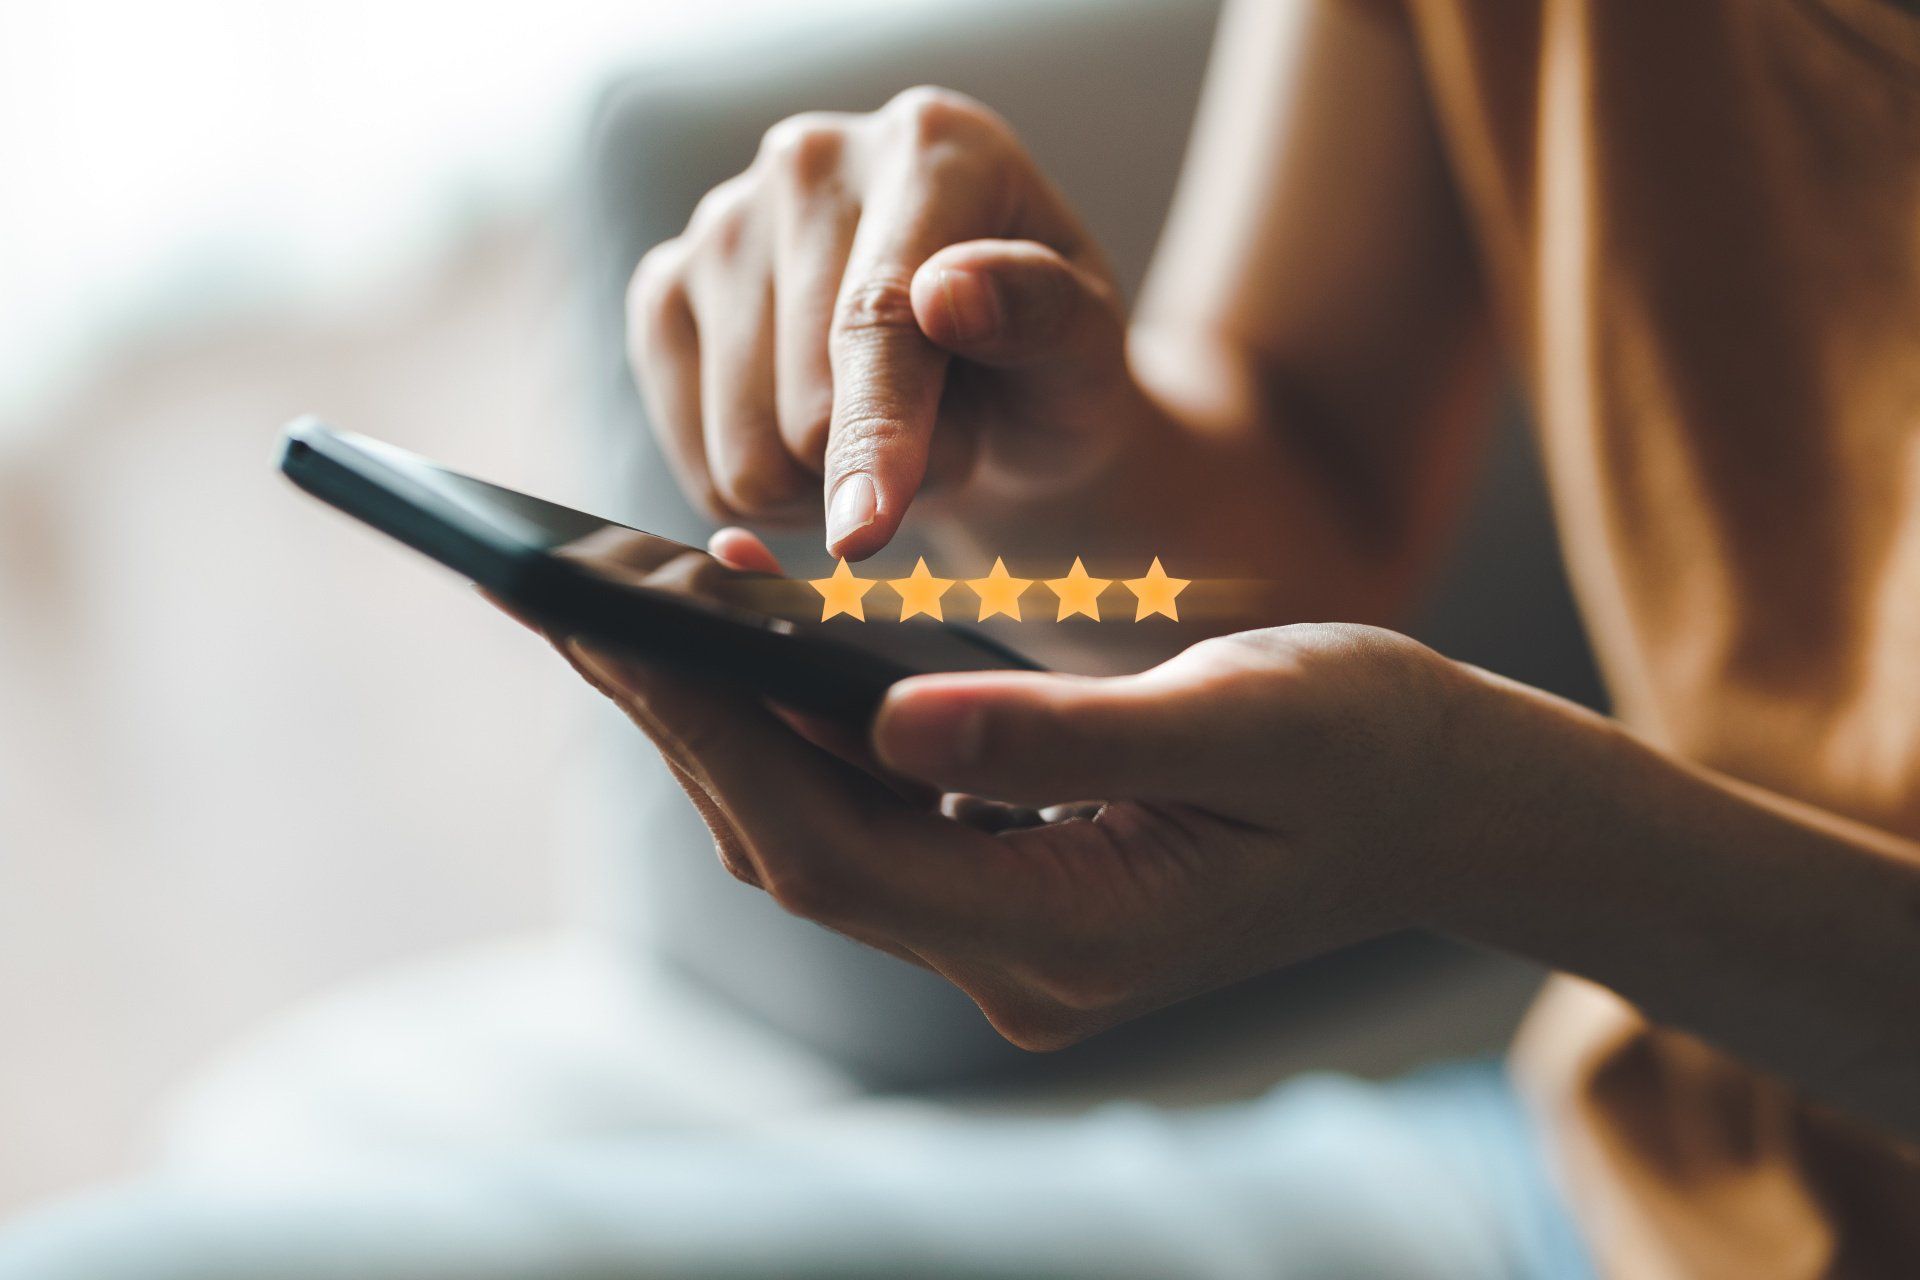 Baton Rouge Reputation Management: A Case Study on Improving and Increasing Online Reviews